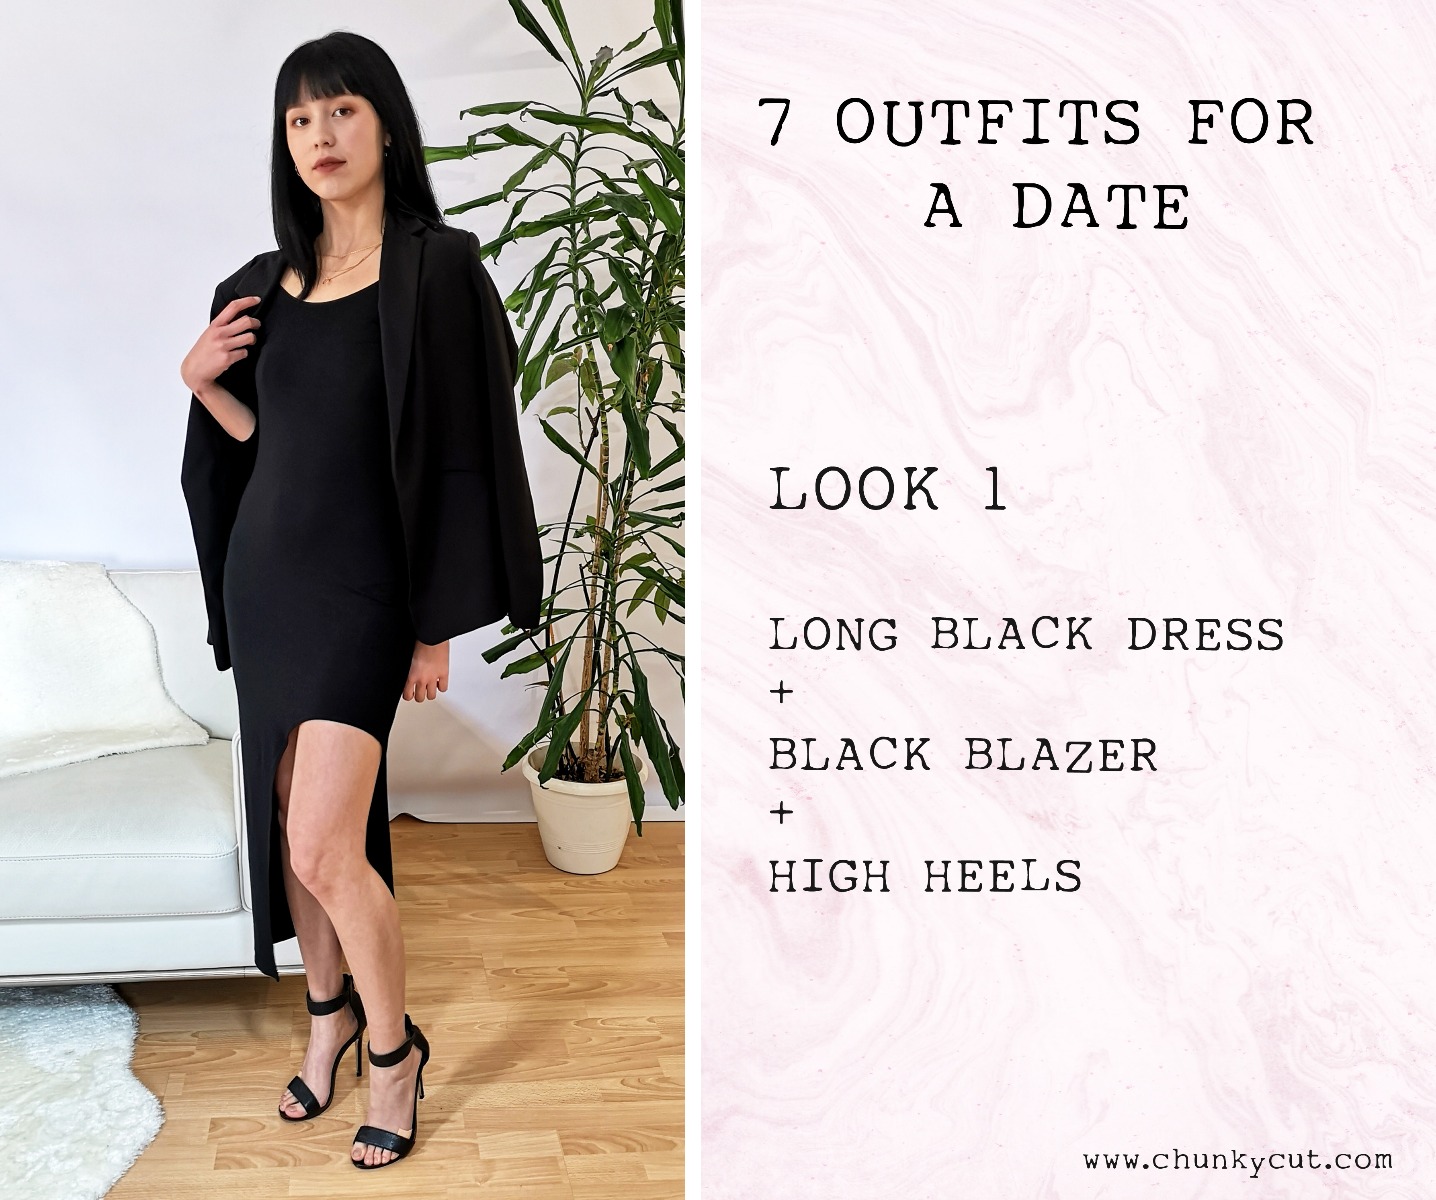 Look 1 - Long Black dress with a black blazer and high heels